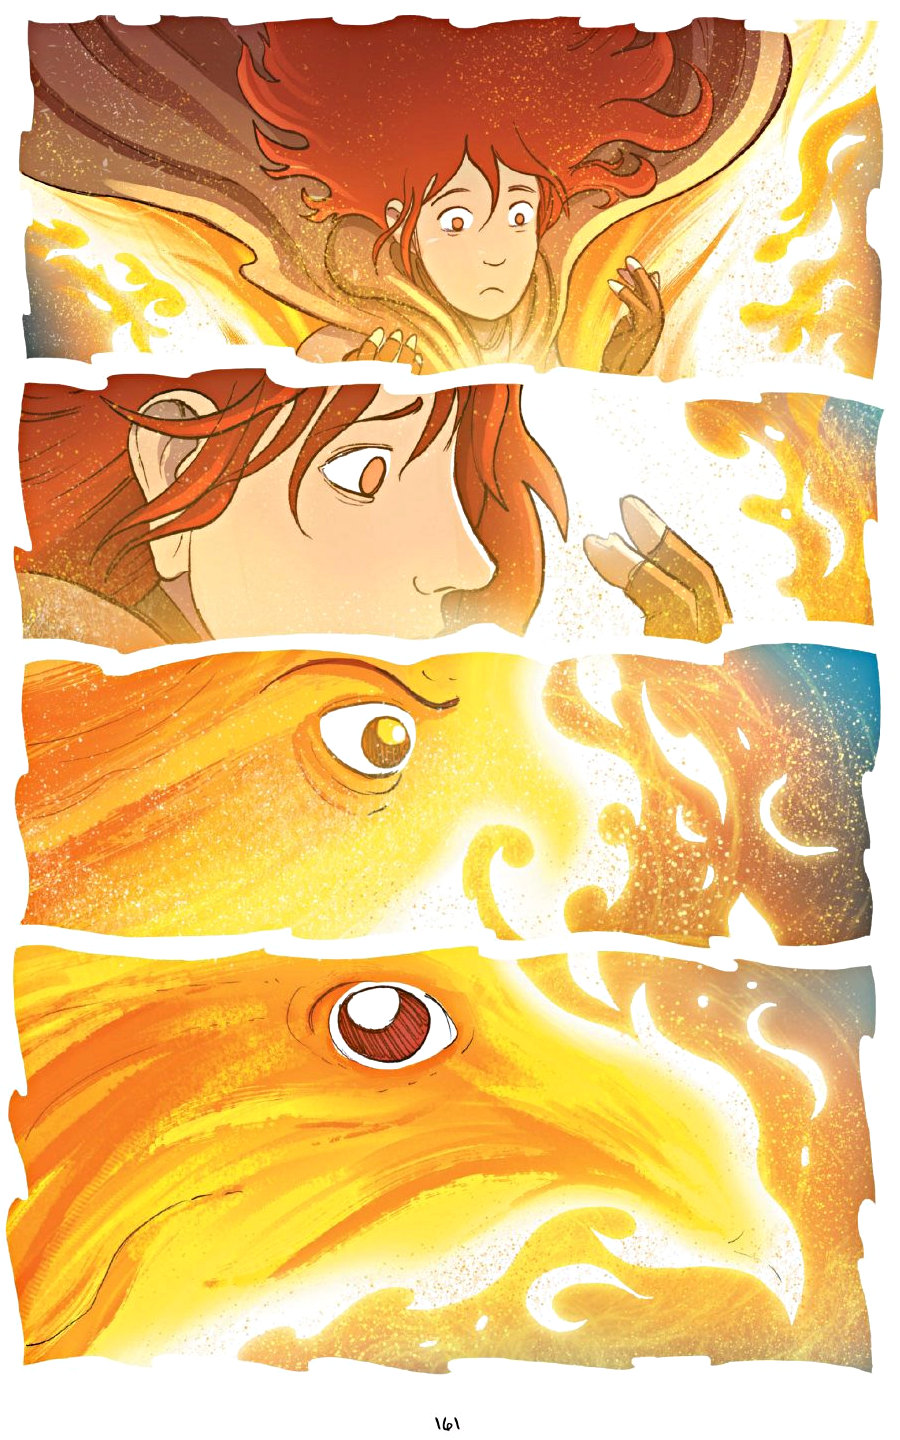 page 161 of amulet 7 firelight graphic novel